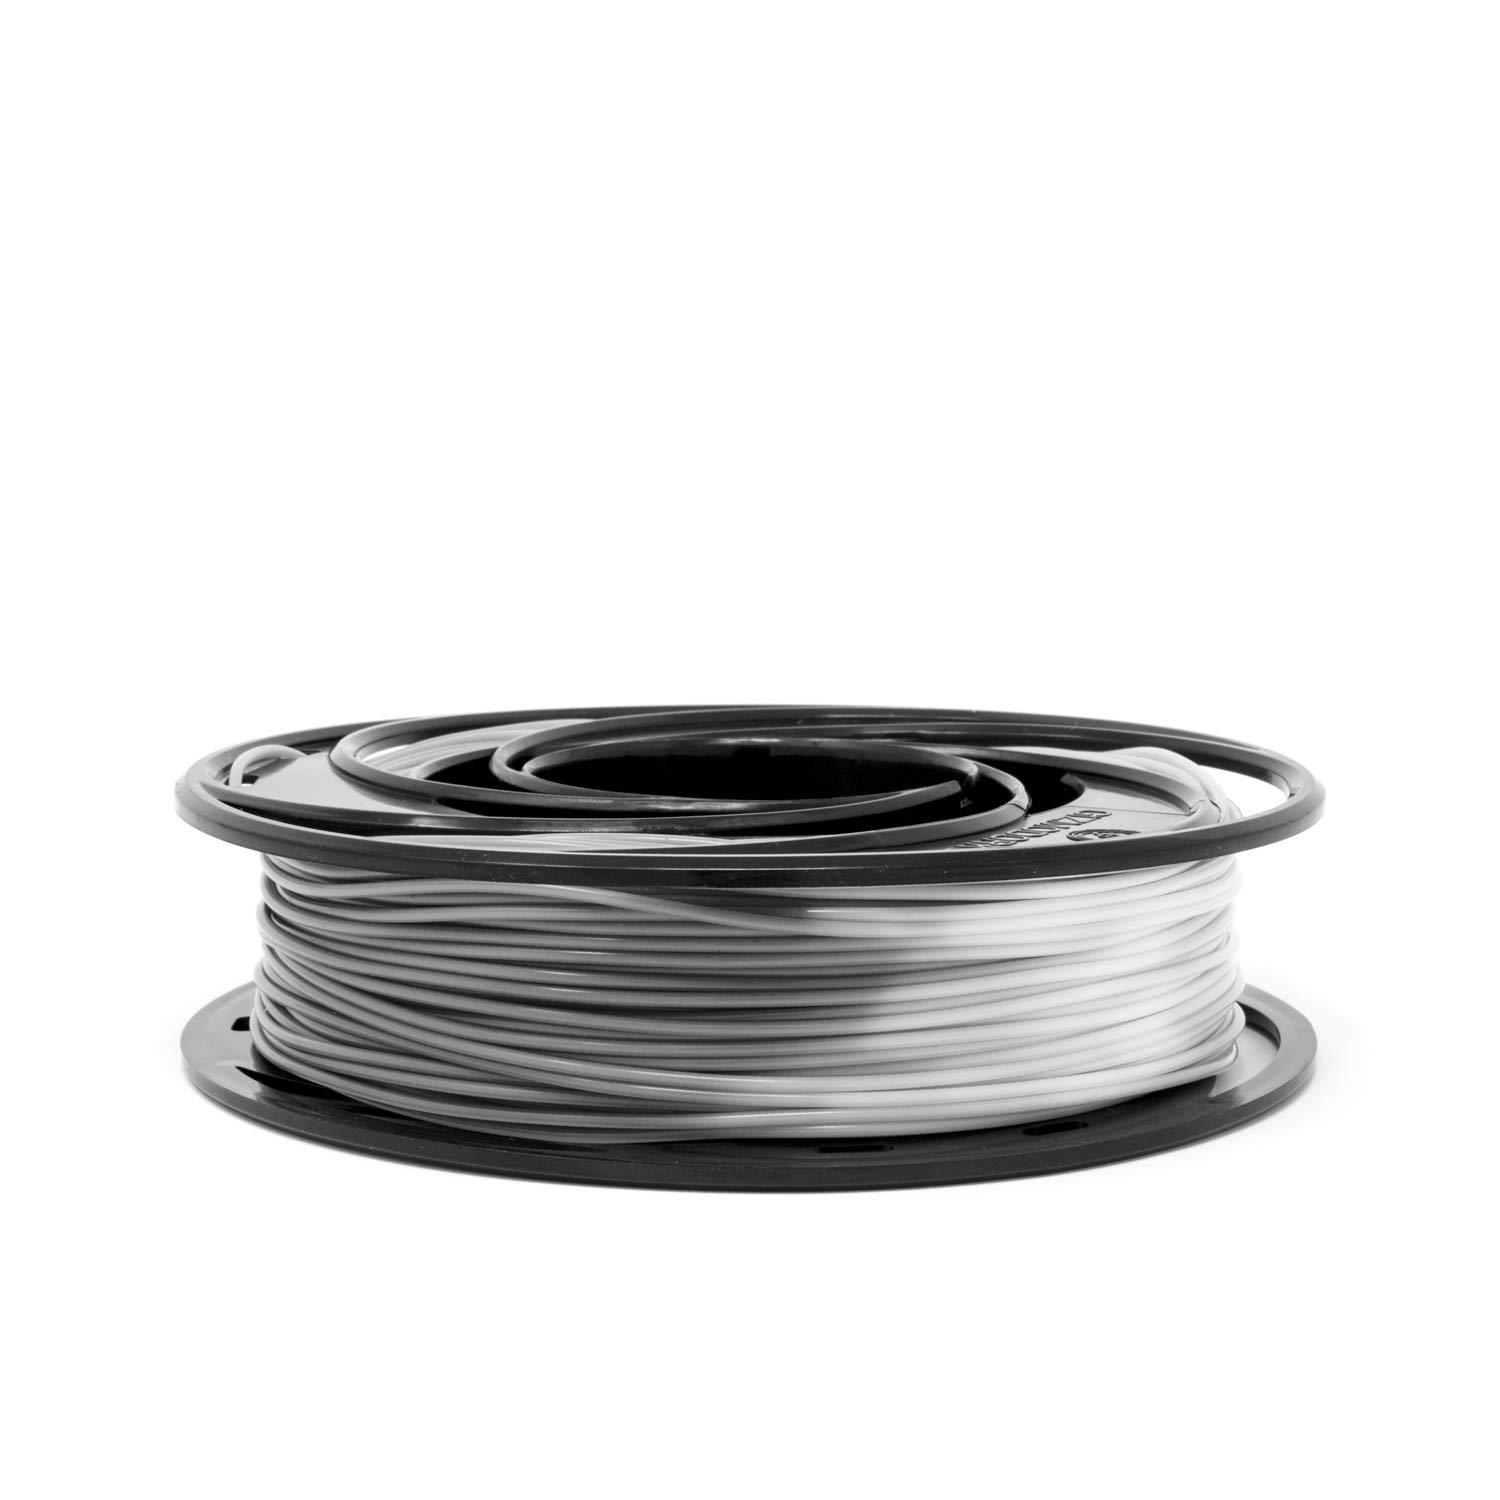 Gizmo Dorks PLA Filament 1.75mm 200g for 3D Printers, Heat Color Change Gray to White